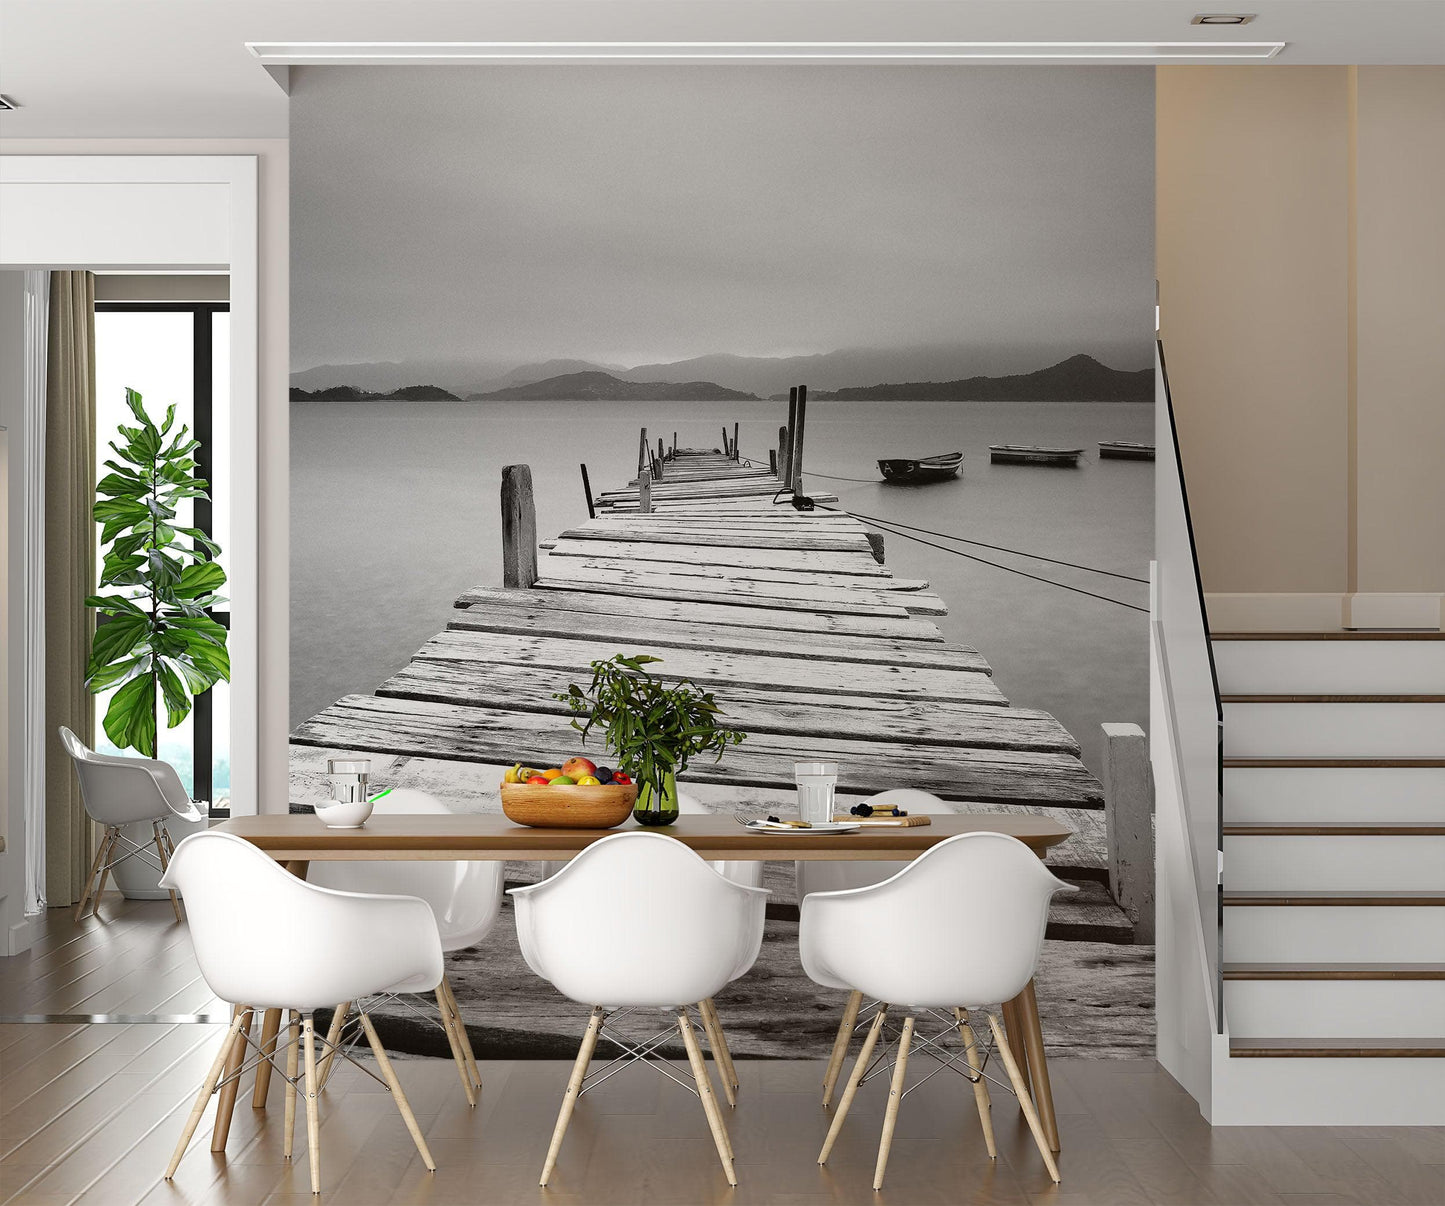 Misty Lake View Boat on Pier Black and White Mural Wall Decal Sticker #6143